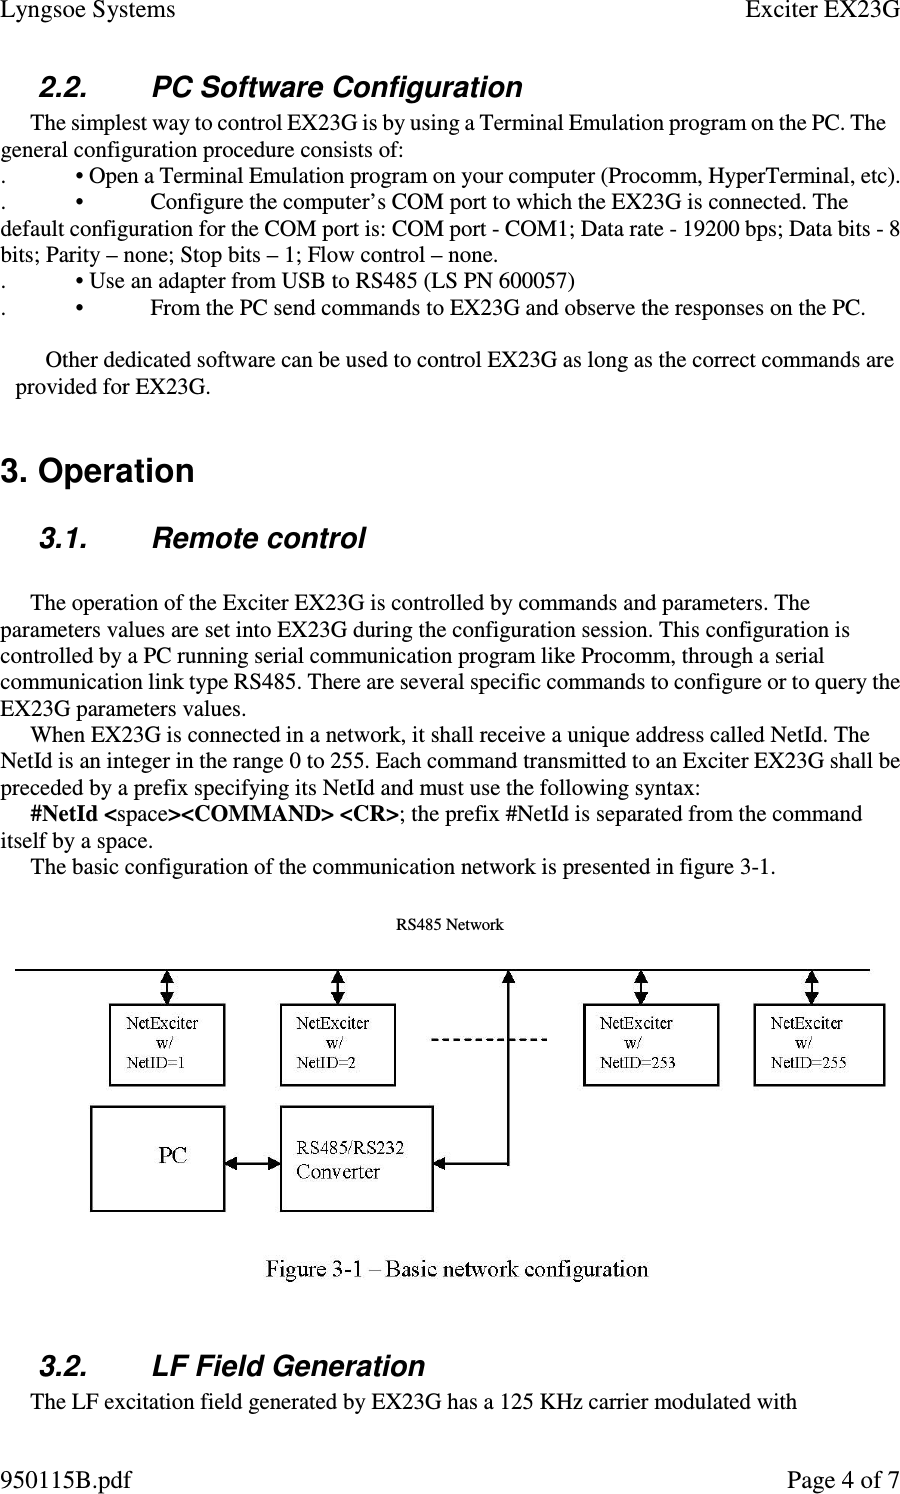 Lyngsoe Systems    Exciter EX23G 950115B.pdf    Page 4 of 7 2.2.  PC Software Configuration  The simplest way to control EX23G is by using a Terminal Emulation program on the PC. The general configuration procedure consists of:  . • Open a Terminal Emulation program on your computer (Procomm, HyperTerminal, etc).  . •  Configure the computer’s COM port to which the EX23G is connected. The default configuration for the COM port is: COM port - COM1; Data rate - 19200 bps; Data bits - 8 bits; Parity – none; Stop bits – 1; Flow control – none.  . • Use an adapter from USB to RS485 (LS PN 600057)  . •  From the PC send commands to EX23G and observe the responses on the PC.   Other dedicated software can be used to control EX23G as long as the correct commands are provided for EX23G.   3. Operation  3.1.  Remote control   The operation of the Exciter EX23G is controlled by commands and parameters. The parameters values are set into EX23G during the configuration session. This configuration is controlled by a PC running serial communication program like Procomm, through a serial communication link type RS485. There are several specific commands to configure or to query the EX23G parameters values.  When EX23G is connected in a network, it shall receive a unique address called NetId. The NetId is an integer in the range 0 to 255. Each command transmitted to an Exciter EX23G shall be preceded by a prefix specifying its NetId and must use the following syntax:  #NetId &lt;space&gt;&lt;COMMAND&gt; &lt;CR&gt;; the prefix #NetId is separated from the command itself by a space.  The basic configuration of the communication network is presented in figure 3-1.  RS485 Network   3.2.  LF Field Generation  The LF excitation field generated by EX23G has a 125 KHz carrier modulated with 